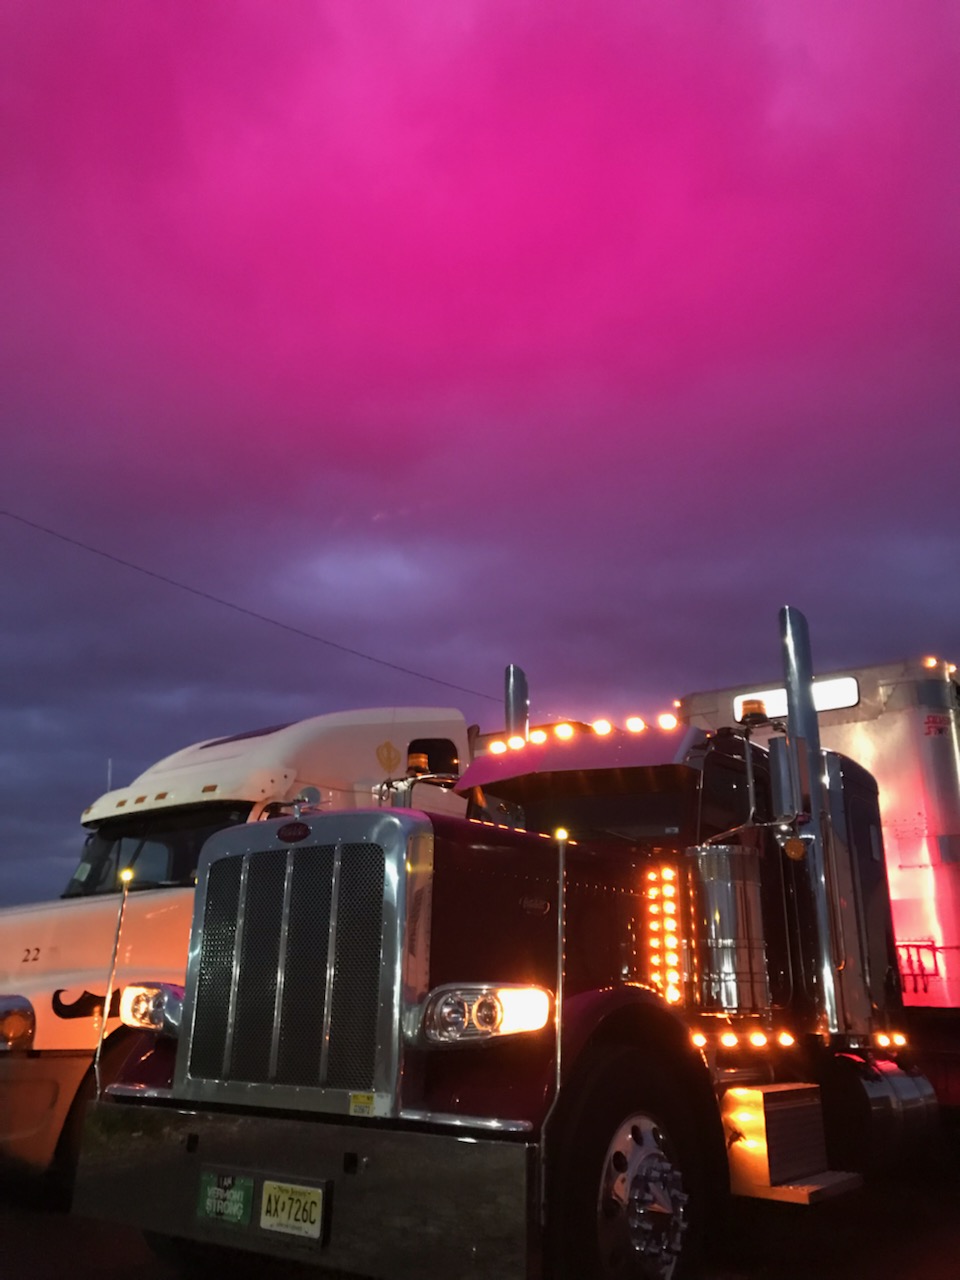 Simply Haulin' truck trip to PA with amazing pink sky